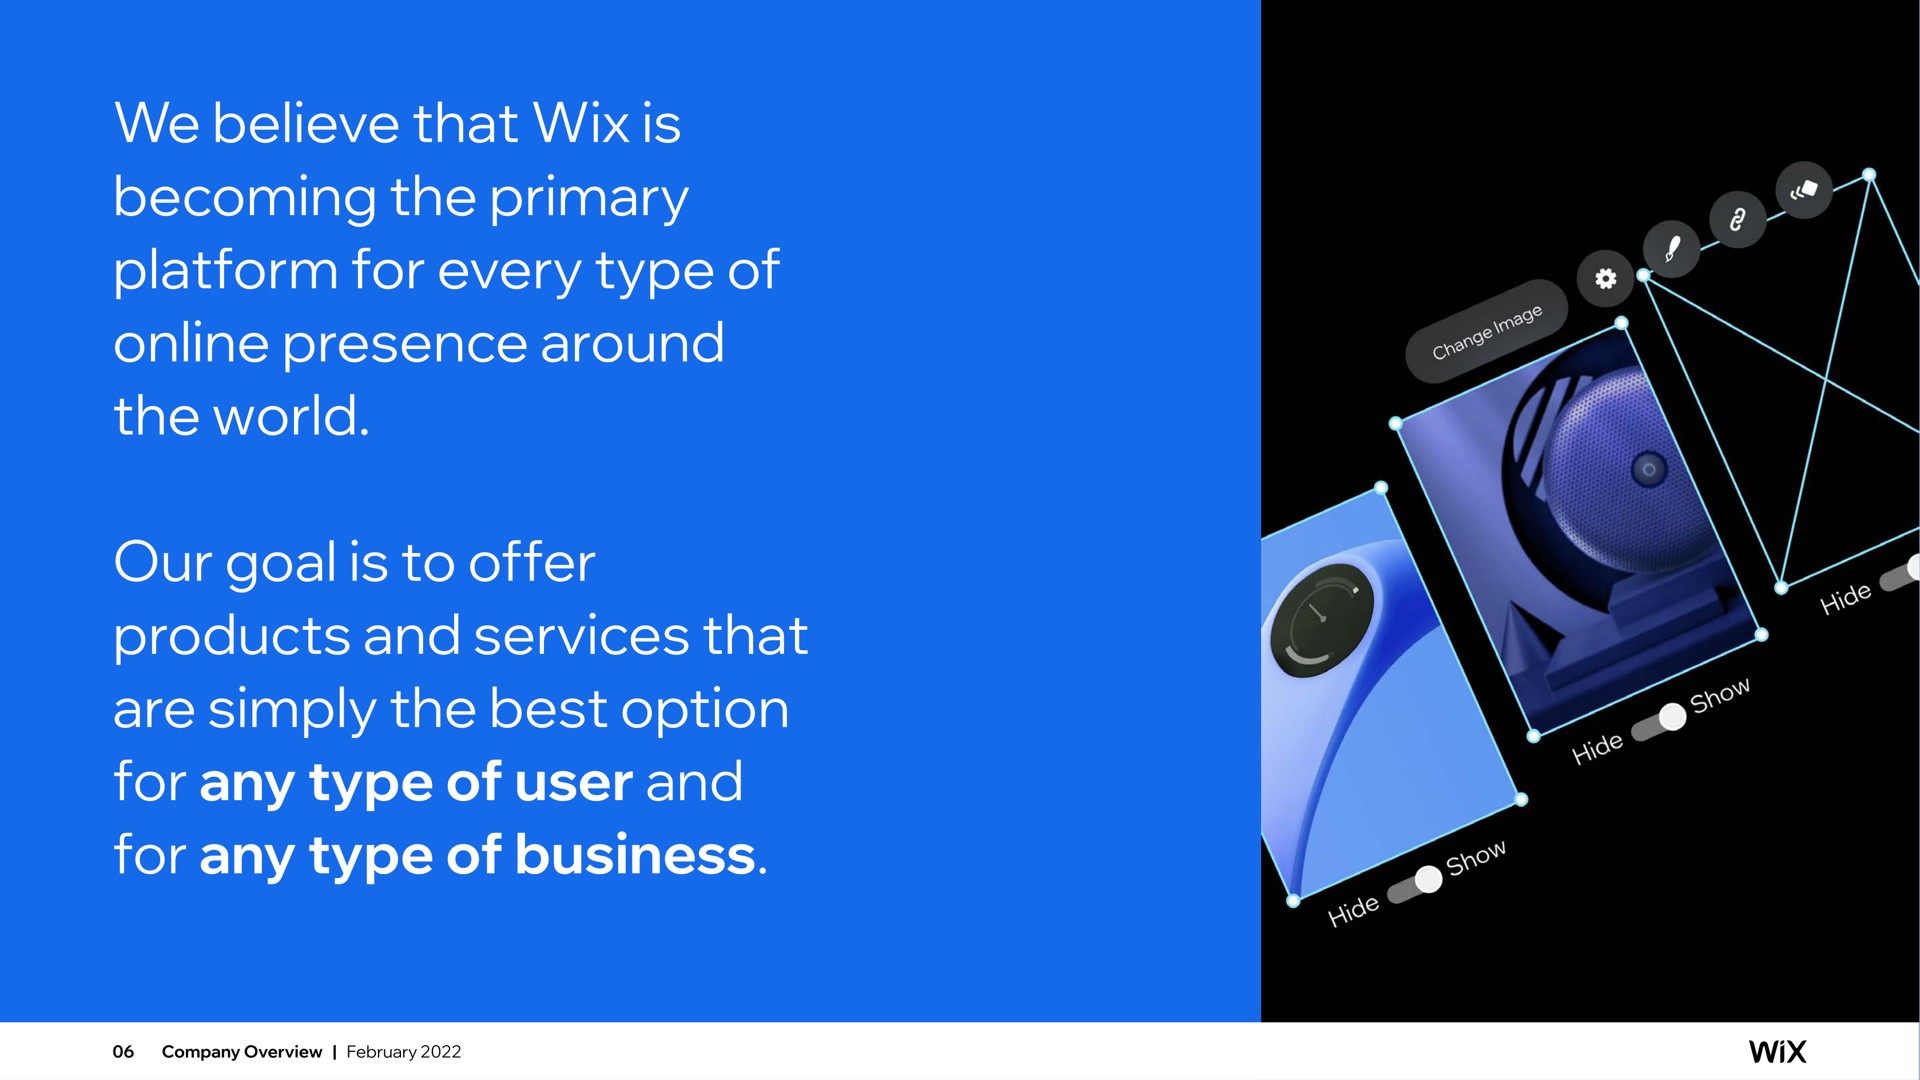 we believe that is becoming the primary platform for every type of presence around the world our goal is to offer products and services that are simply the best option for any type of user and for any type of business | Wix